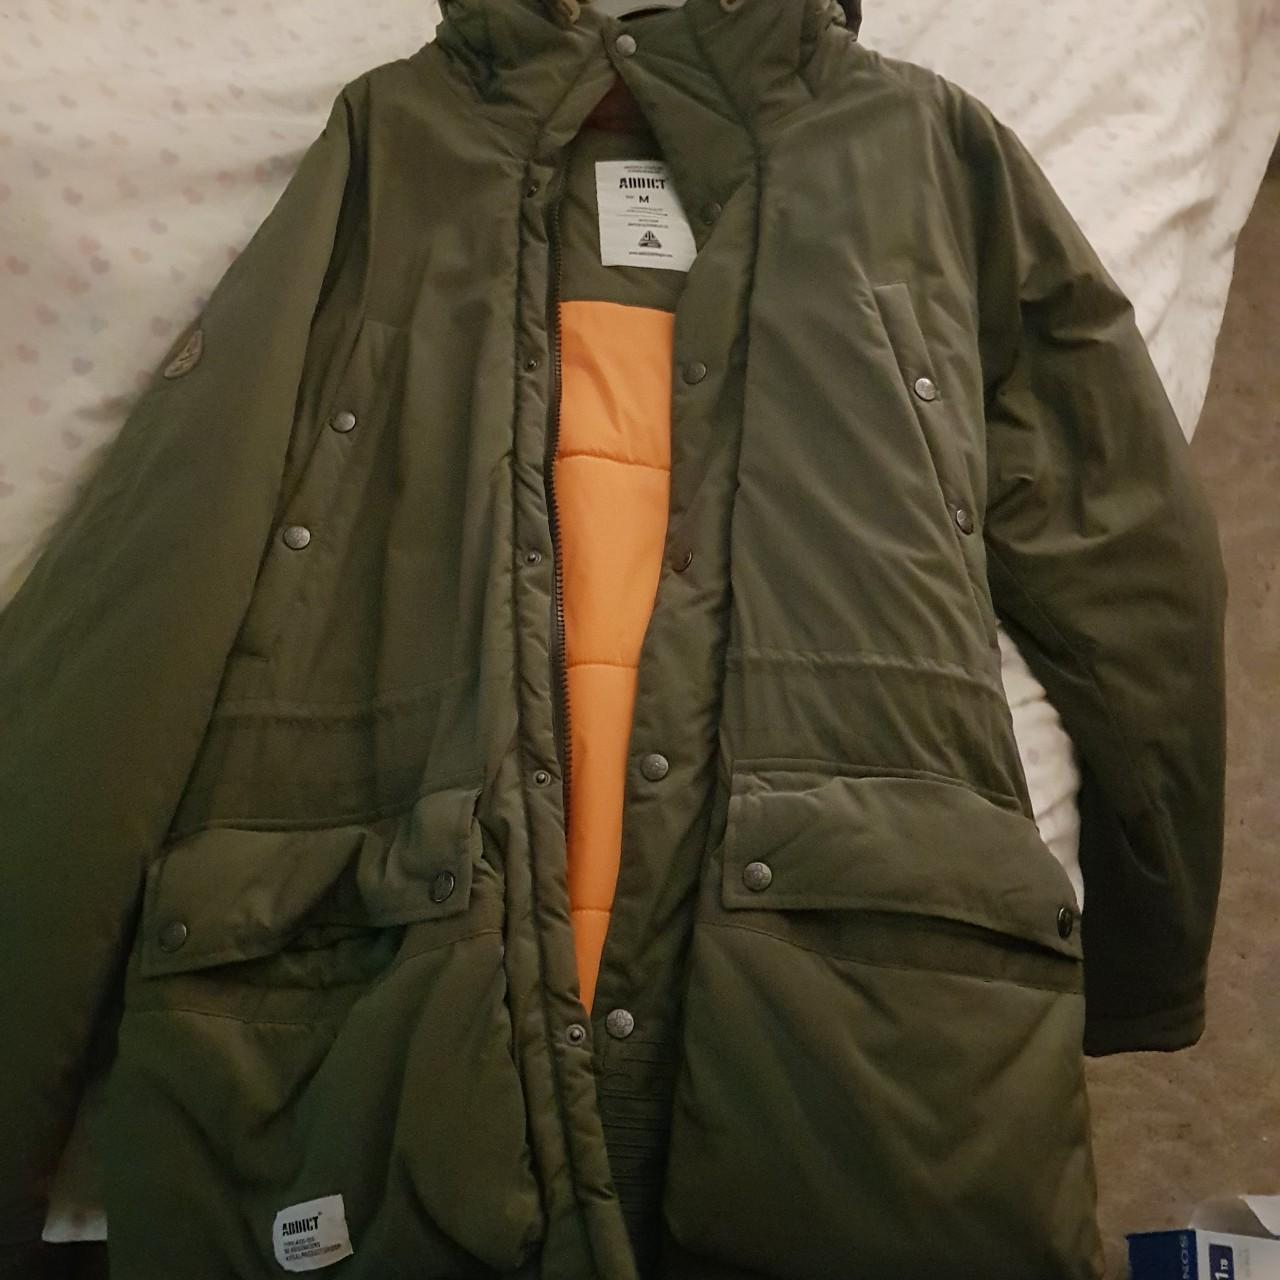 Addict clothing green parka jacket purchased from... - Depop